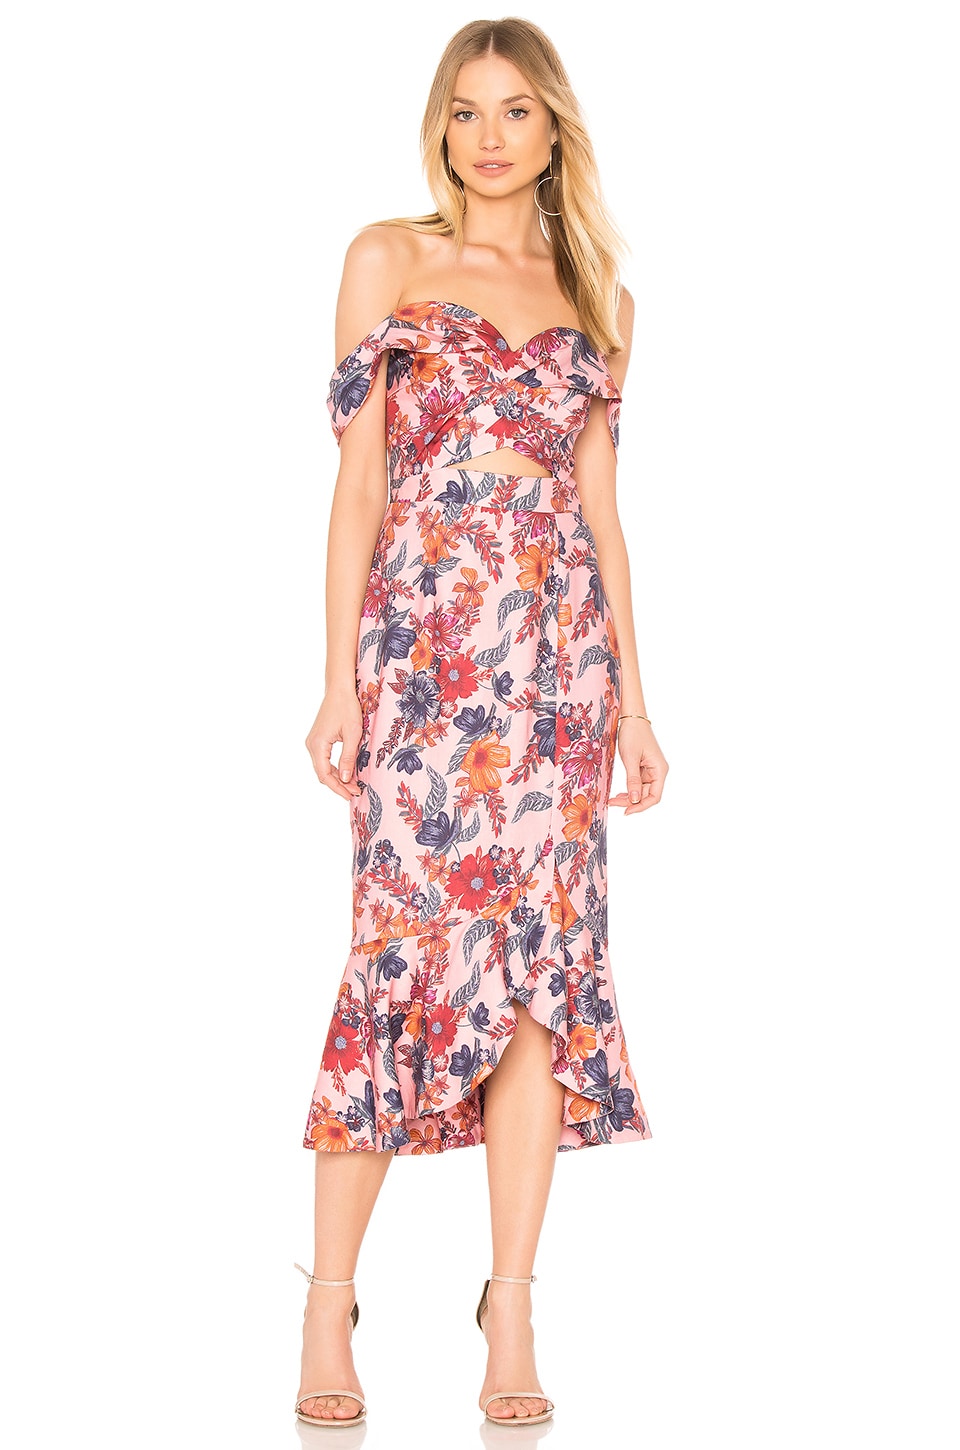 Finders Keepers Rhapsody Midi Dress in Blossom Floral | REVOLVE